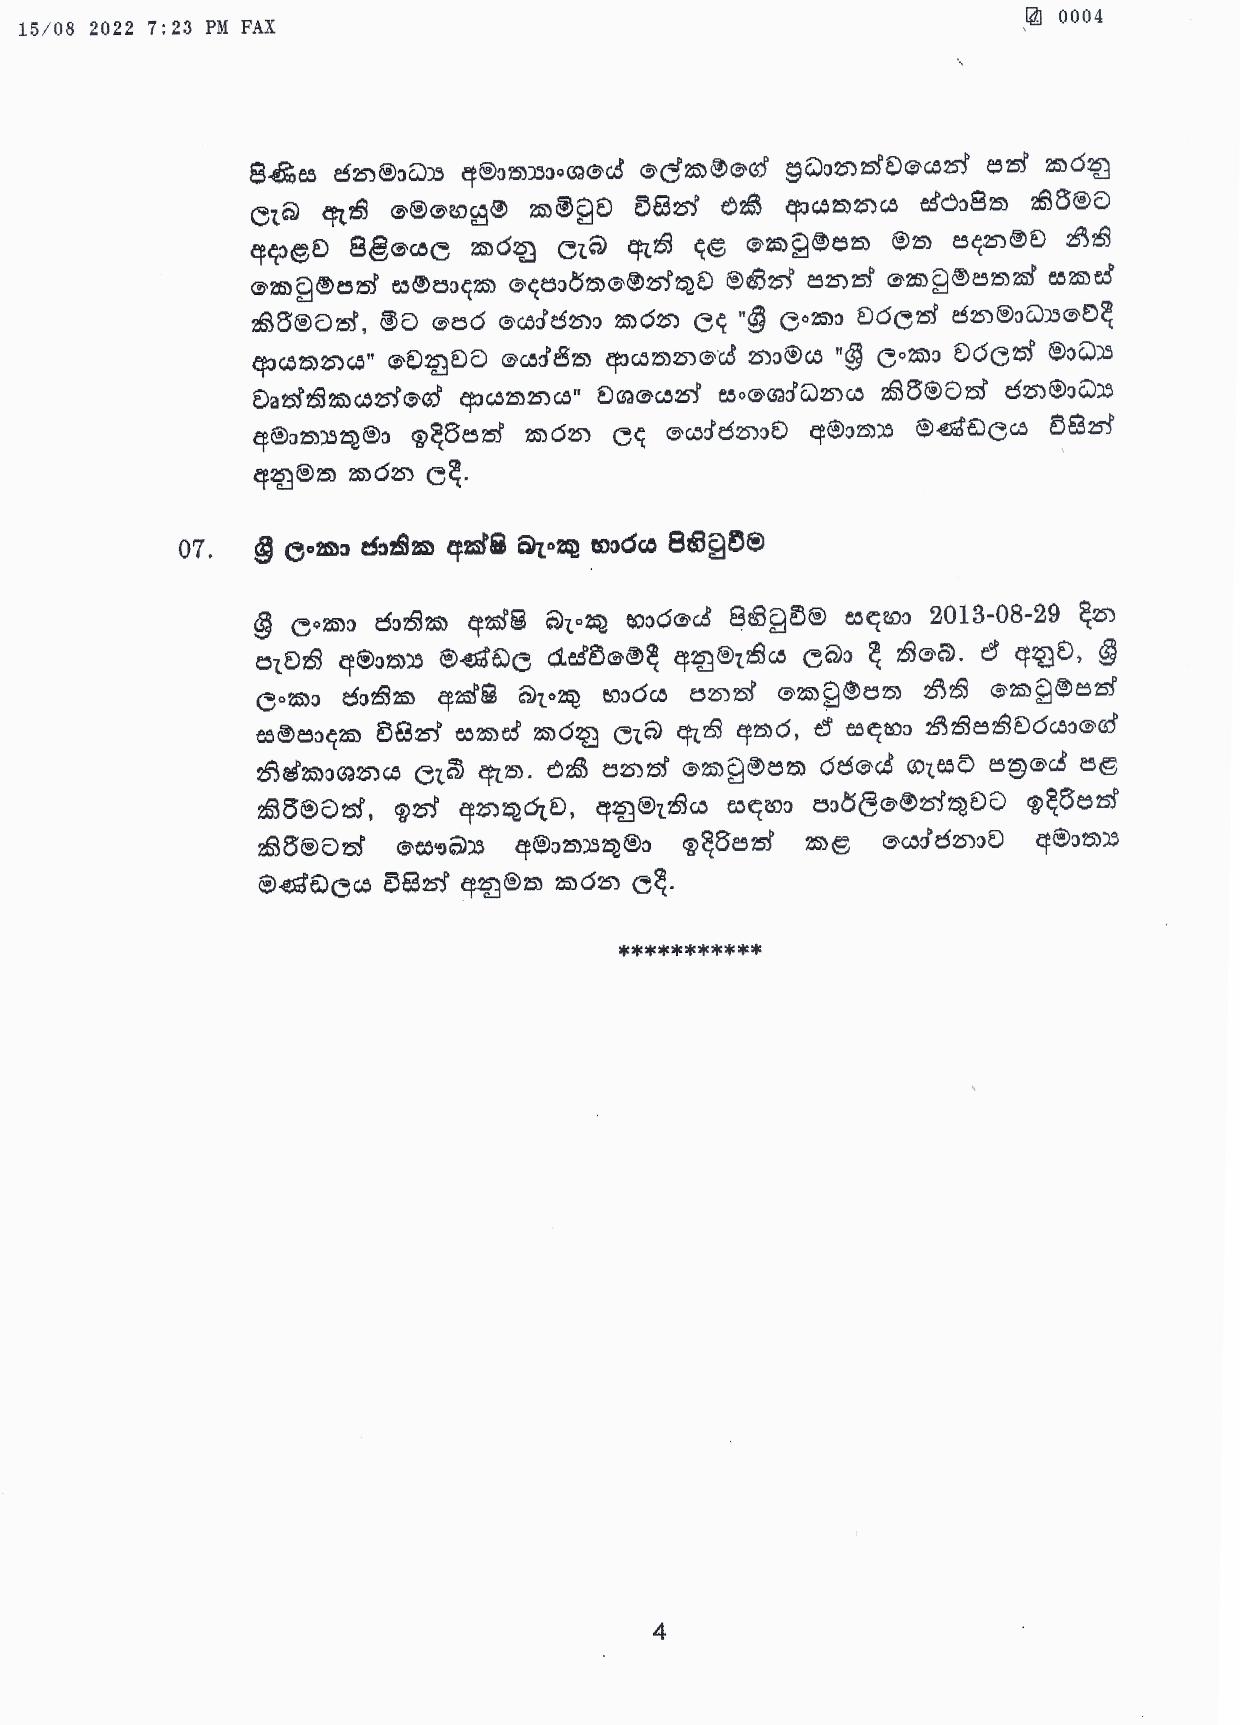 Cabinet Decision on 15.08.2022 page 004